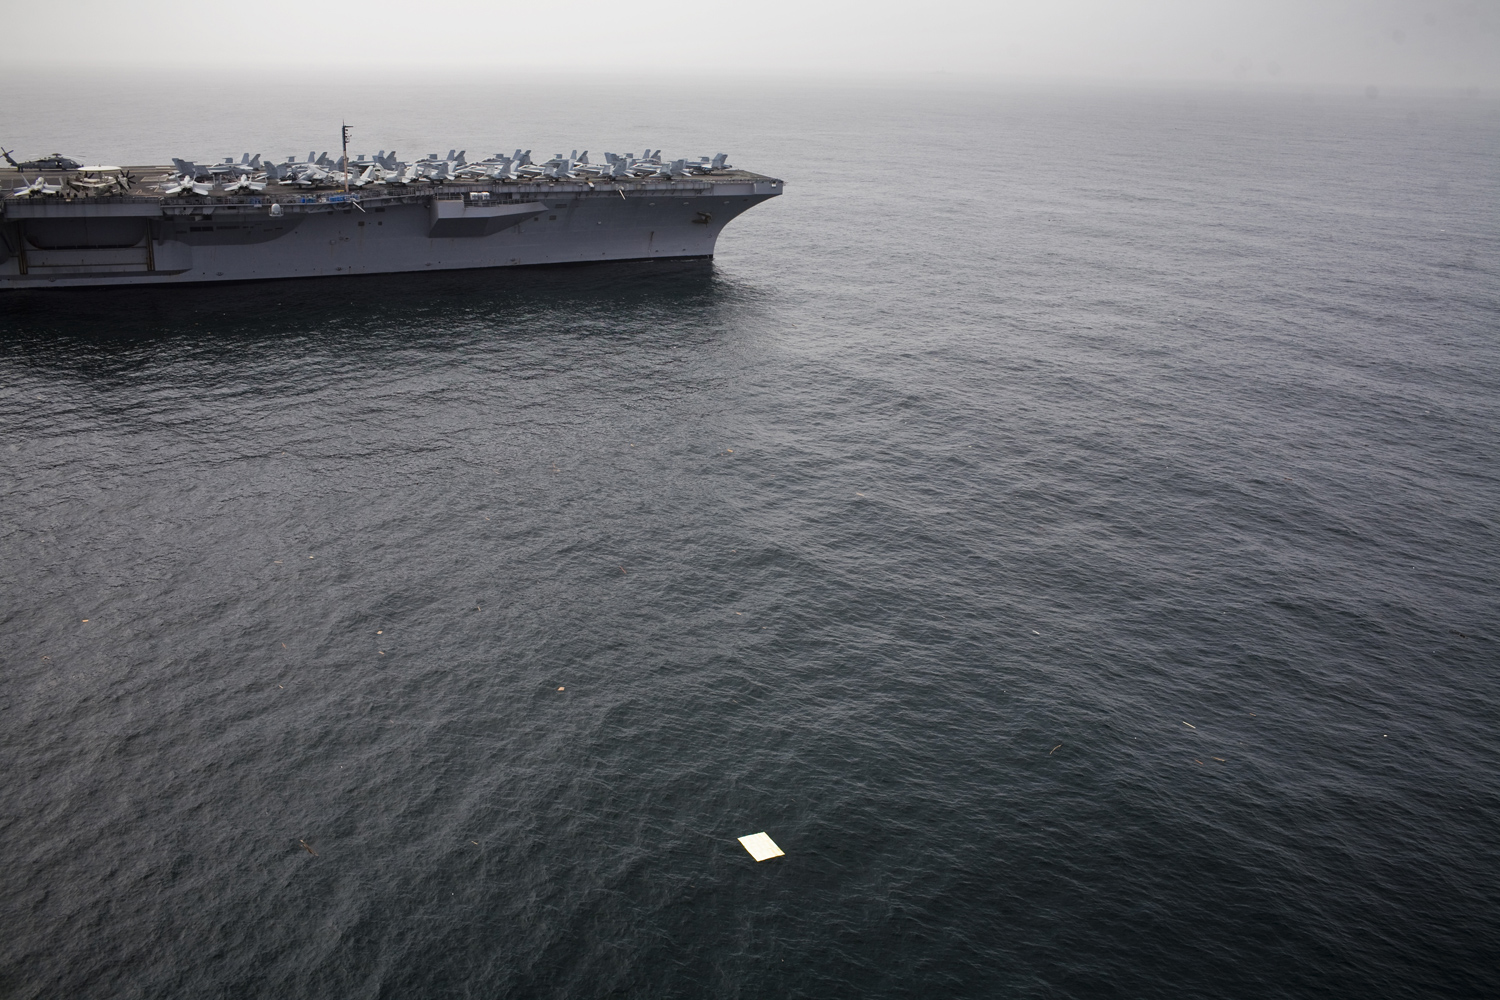 Debris from the aftermath of the Tsunami is visible in the waters near the aircraft carrier USS Ronald Reagan stationed off the coast of Japan's Sendai region. March 20, 2011